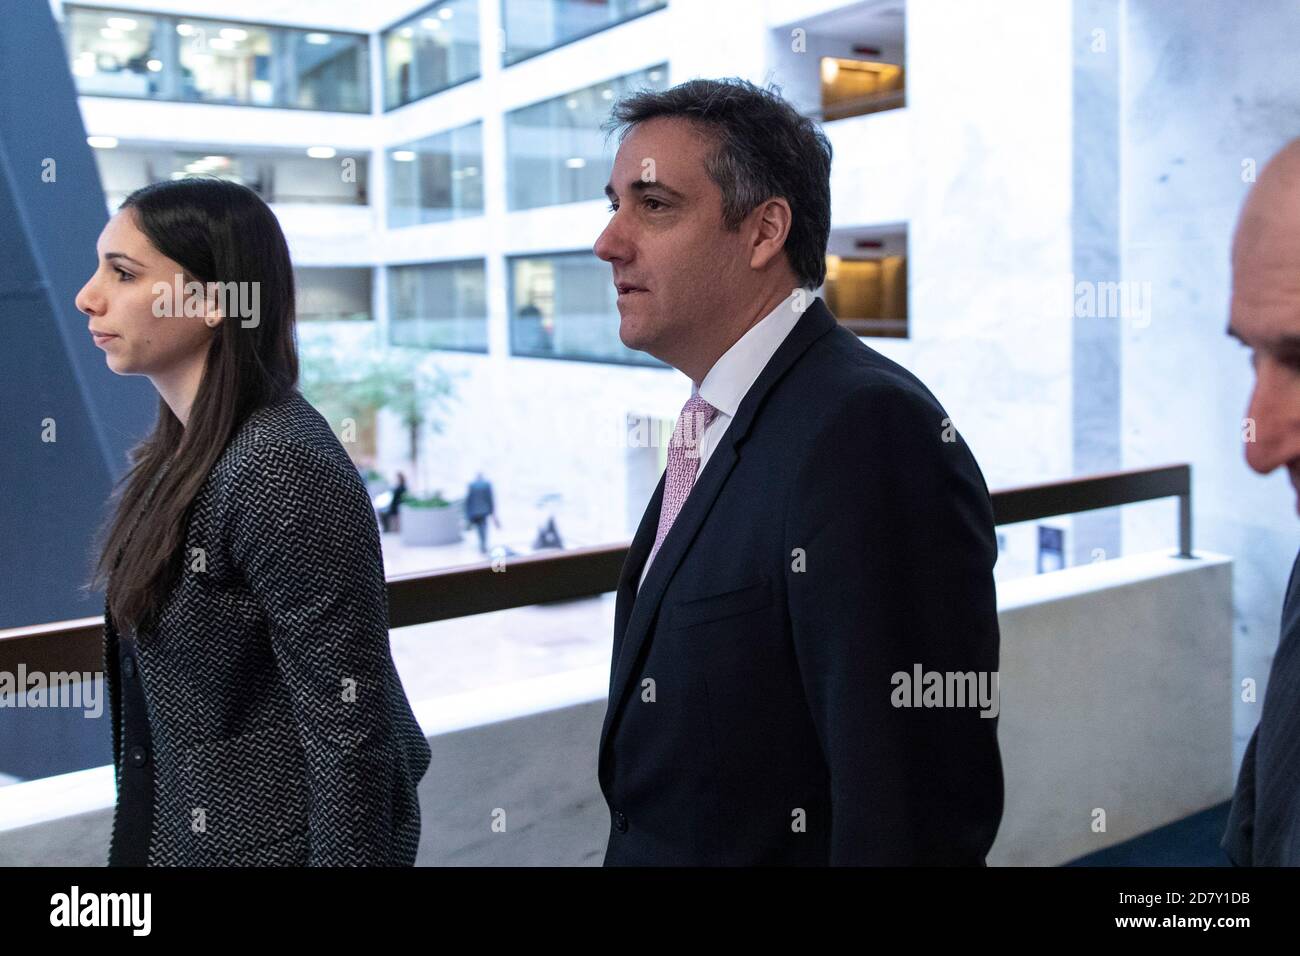 Michael Cohen, former personal lawyer to U.S. President Donald Trump arrives on Capitol Hill for a closed-door hearing in Washington, D.C. on February 26, 2019. Cohen is expected to share details of his work on behalf of Trump and the Trump organization with lawmakers. Cohen pled guilty to lying to congress during a 2017 interview with lawmakers. Credit: Alex Edelman/The Photo Access Stock Photo